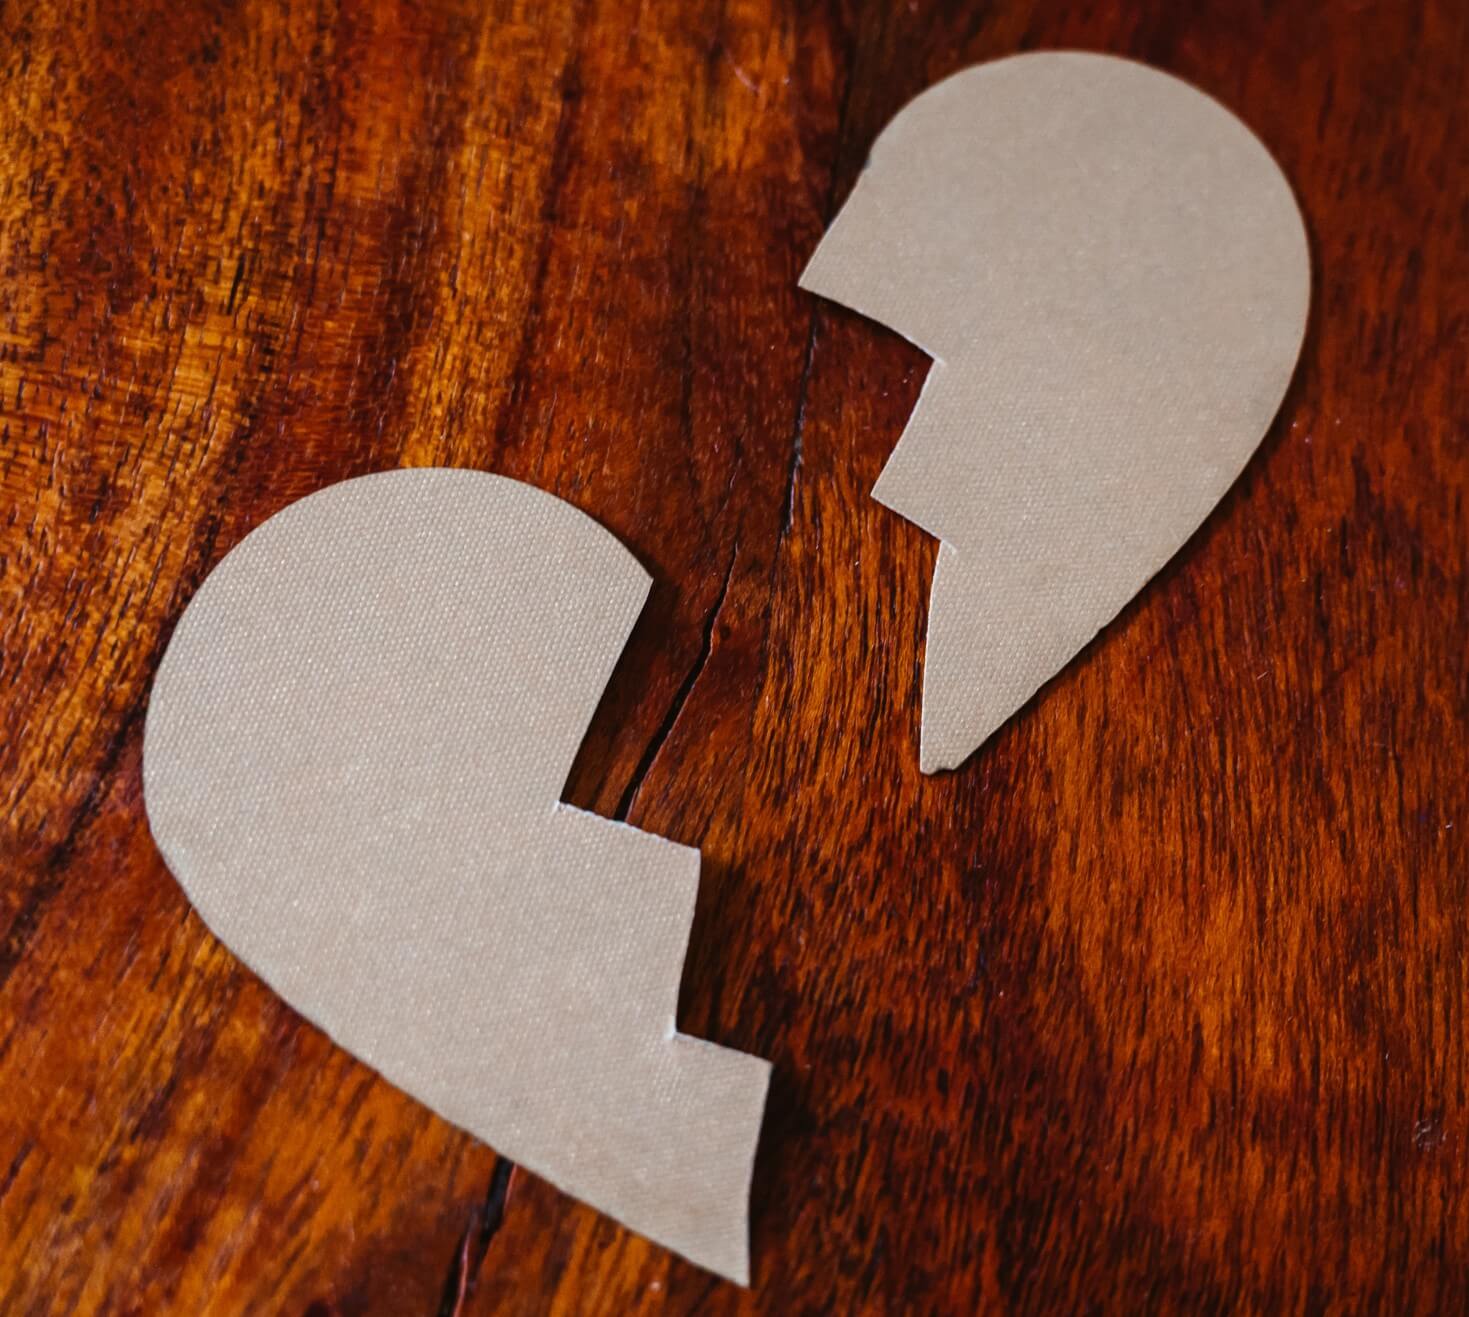 two pieces of a broken paper heart on a wooden table